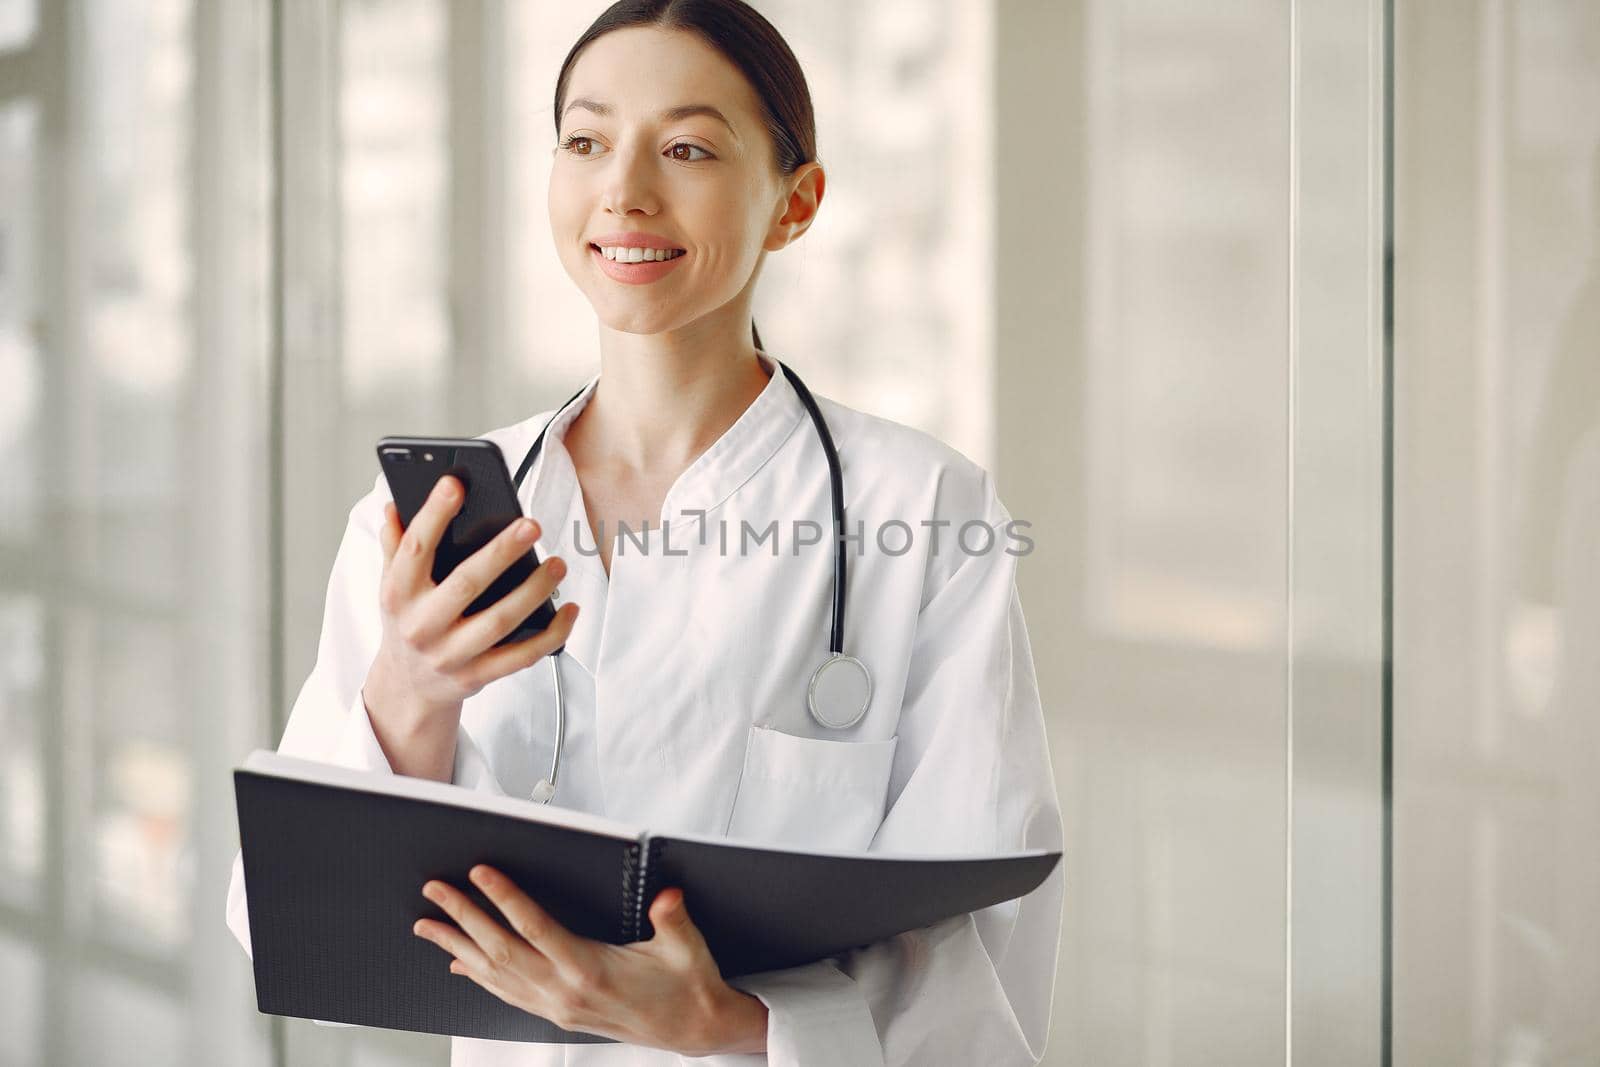 Woman in a uniform. Doctio with a stethoscope. Brunette in a hall.